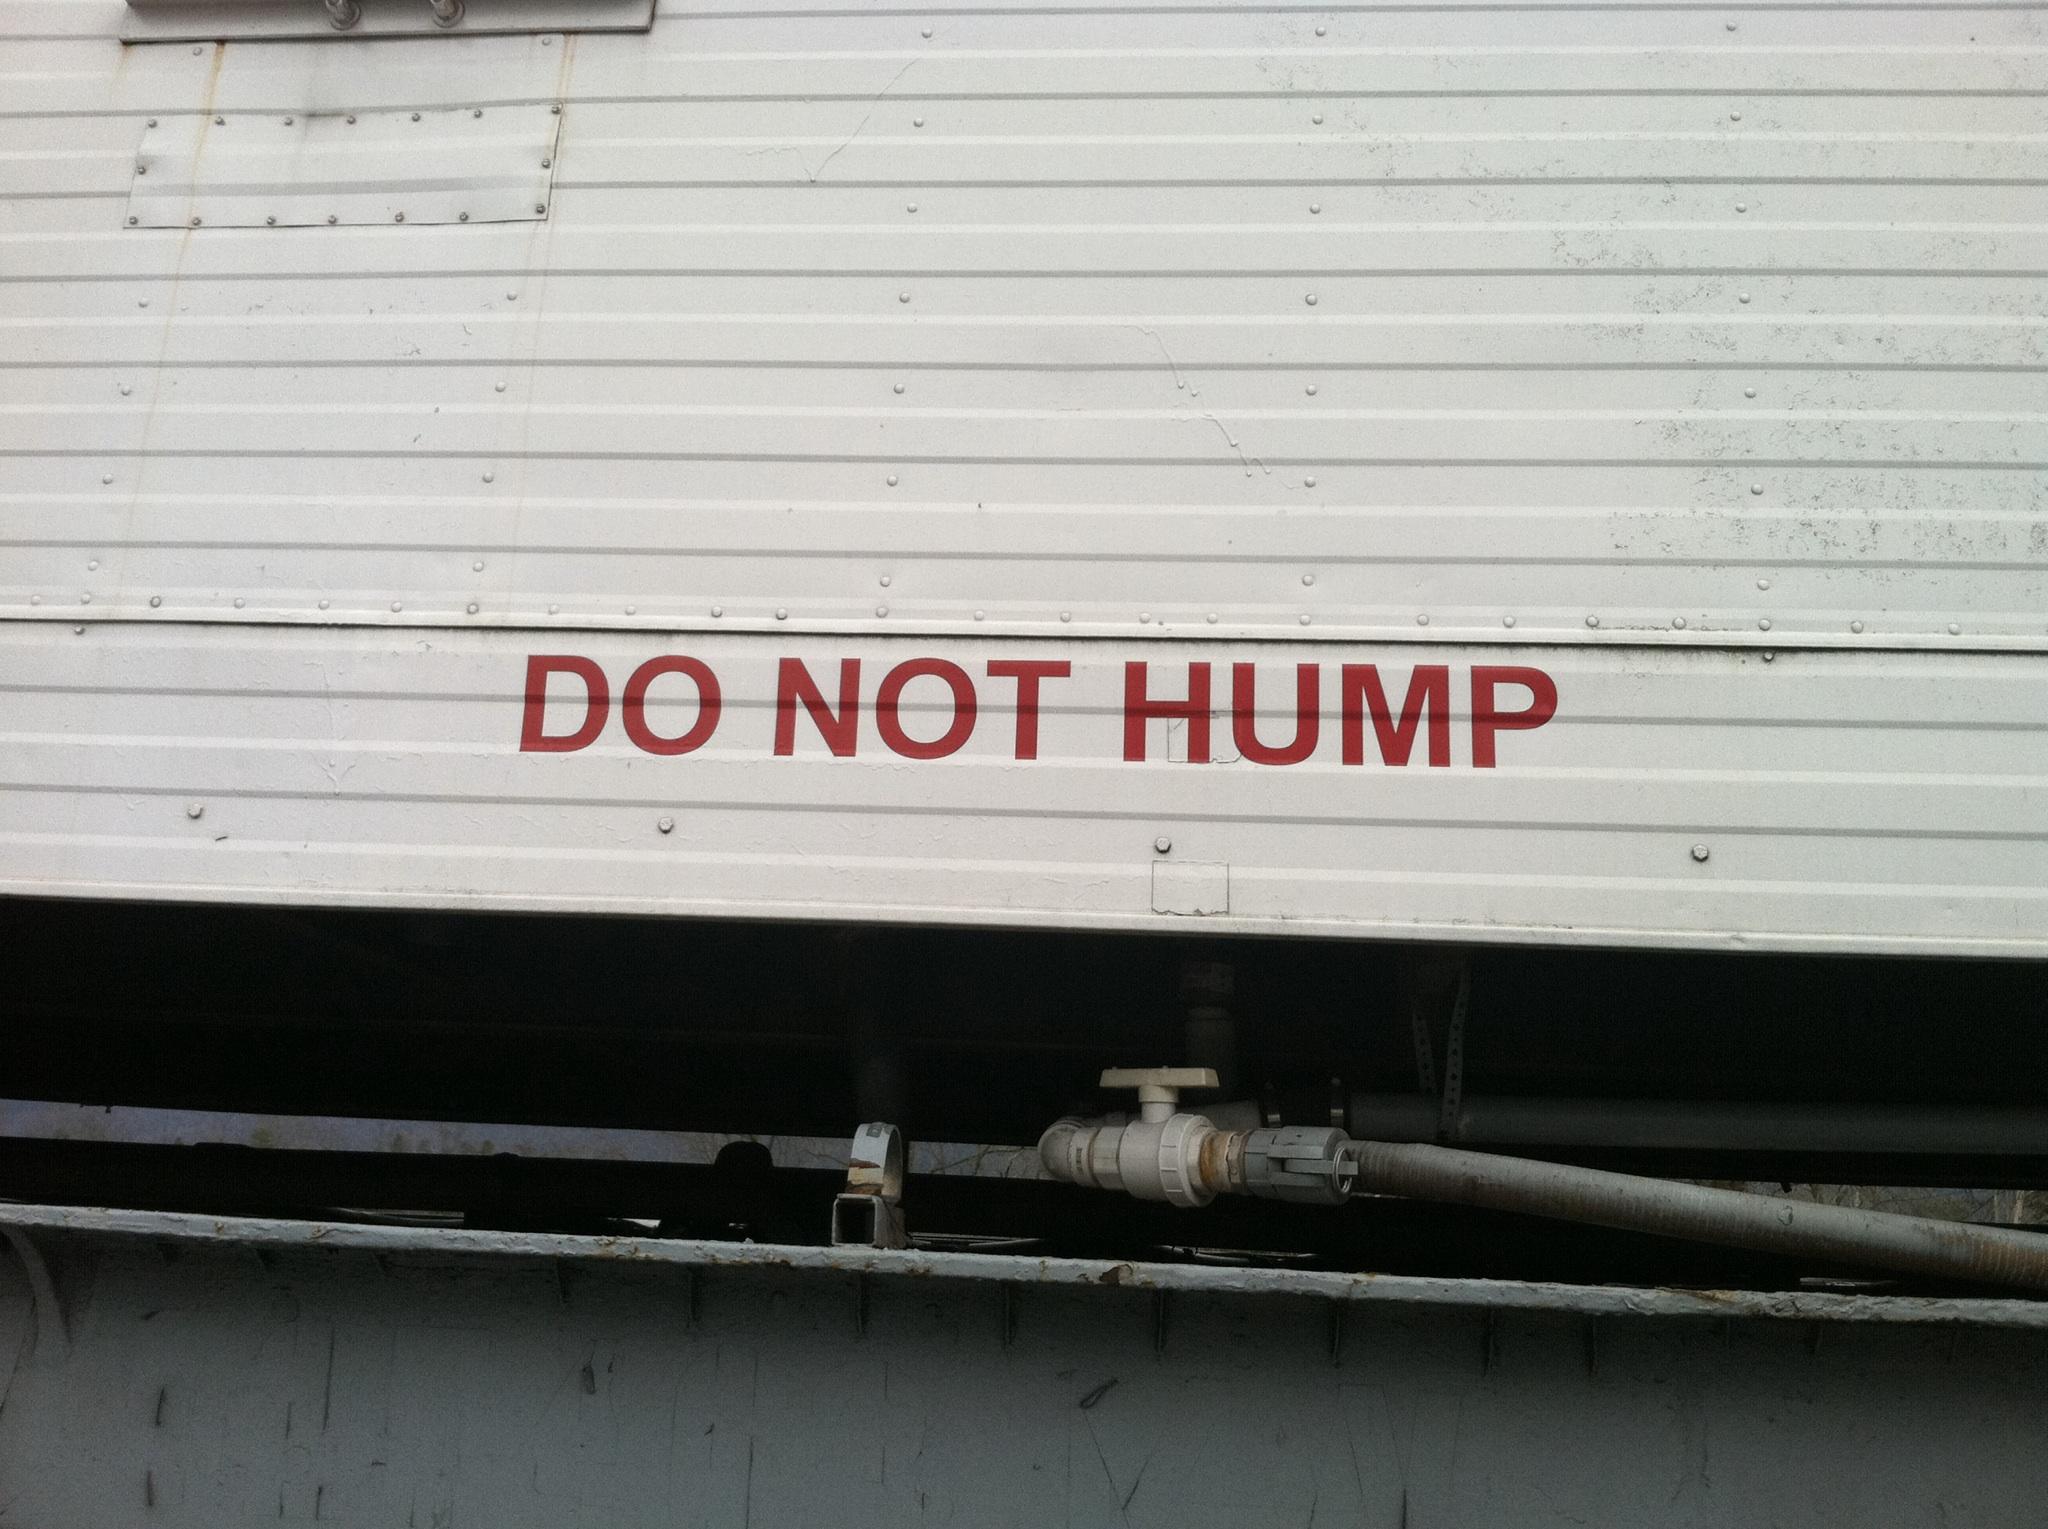 Sign on Railroad cars